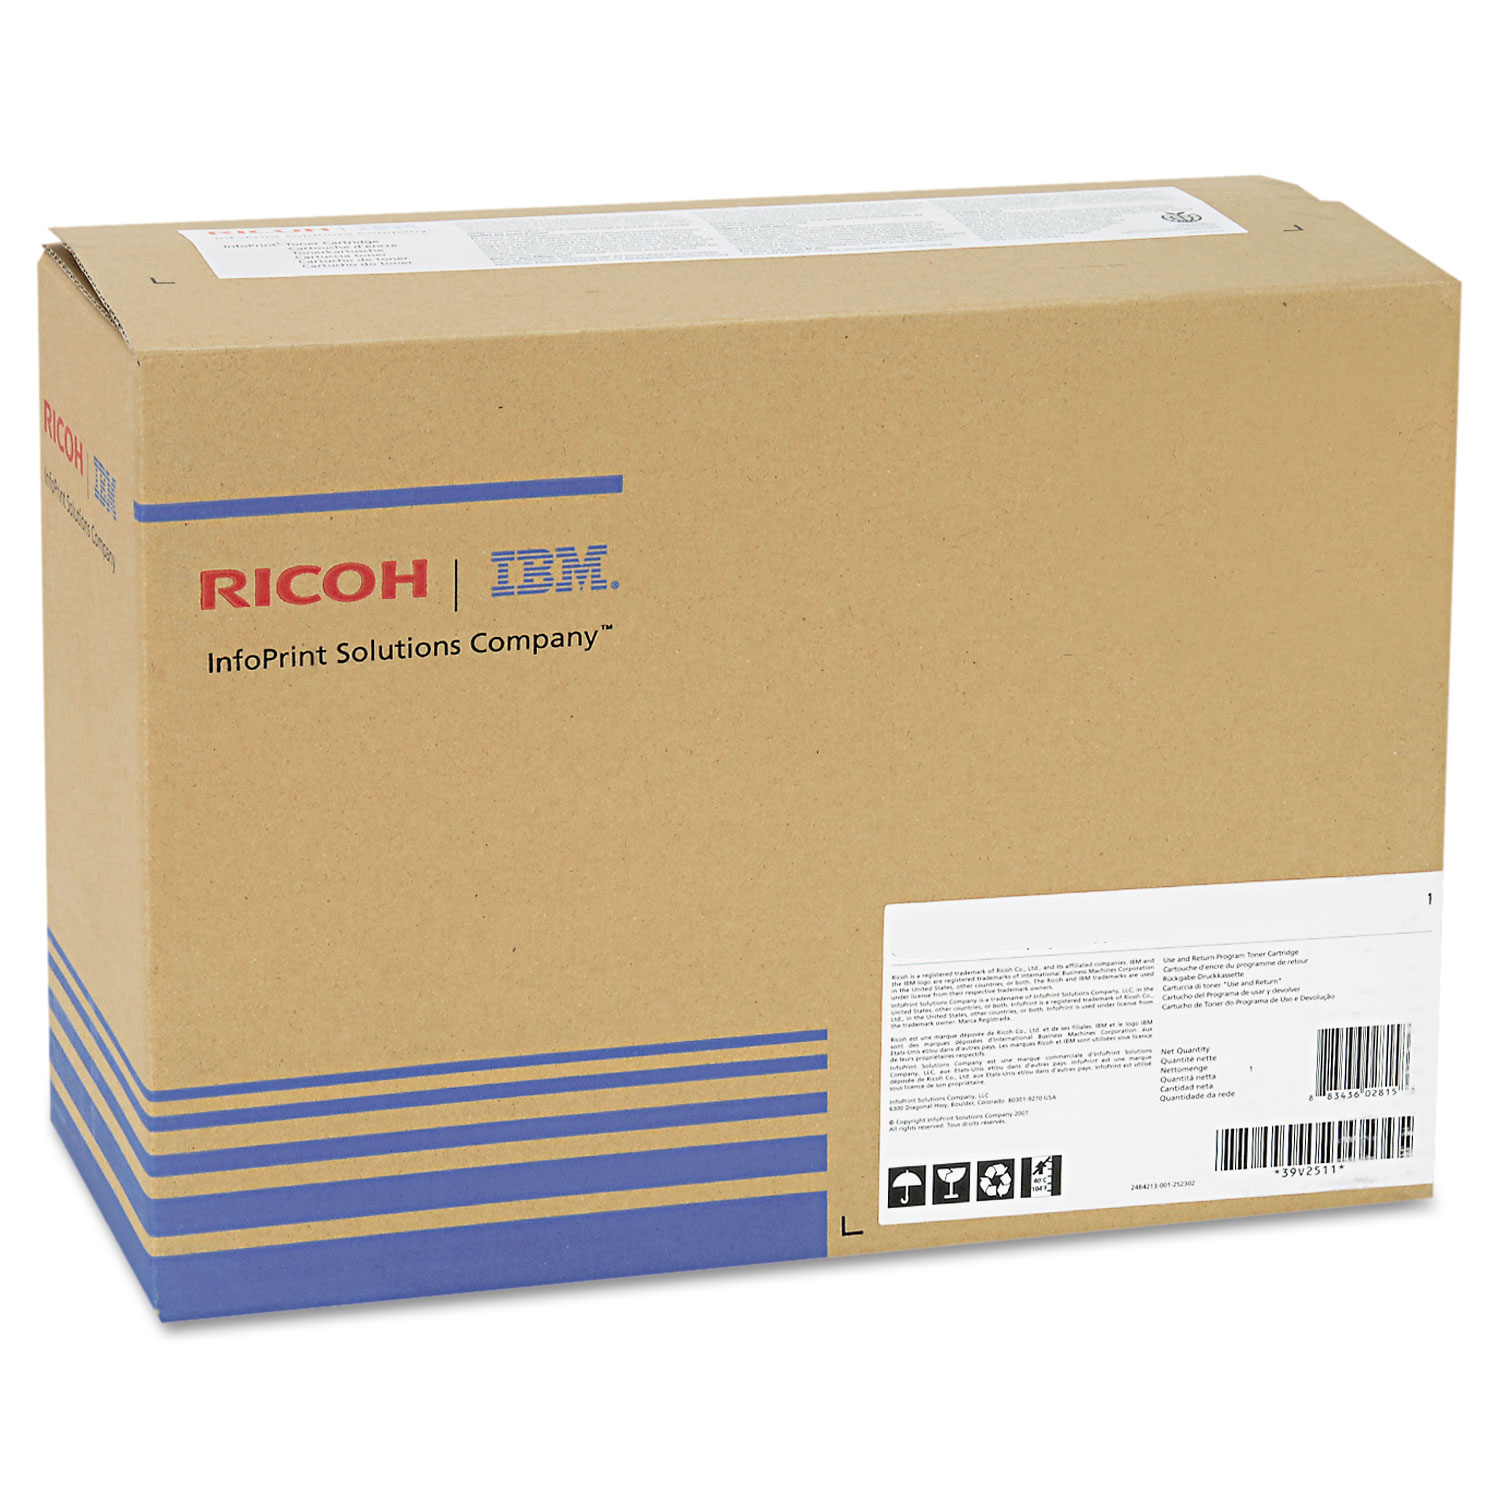 Ricoh 407018 Photoconductor Unit, 50000 Page-yield, Black - image 1 of 2